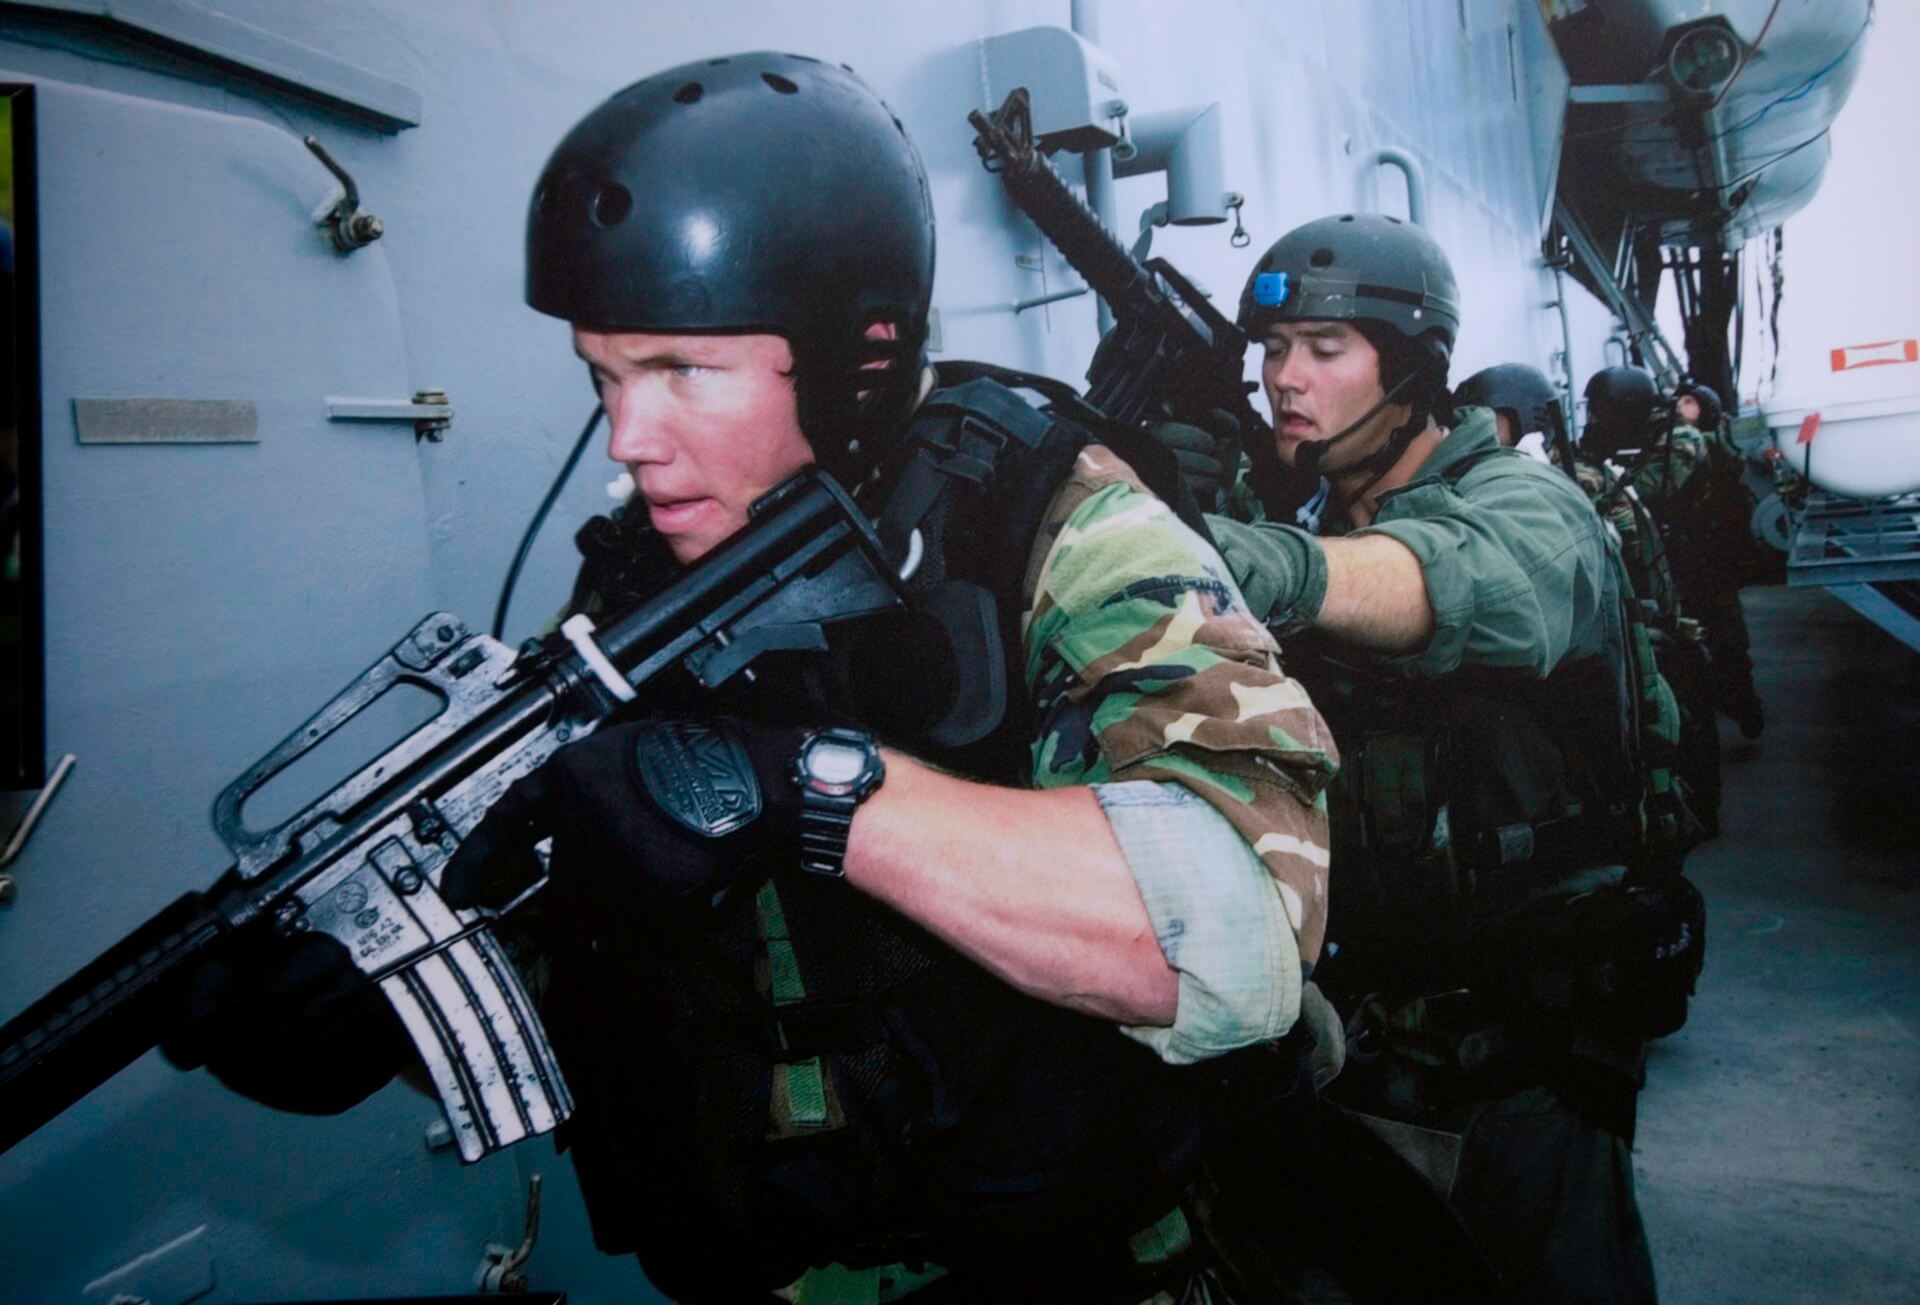 Navy SEALs and the G-Shock DW-6600 military watch